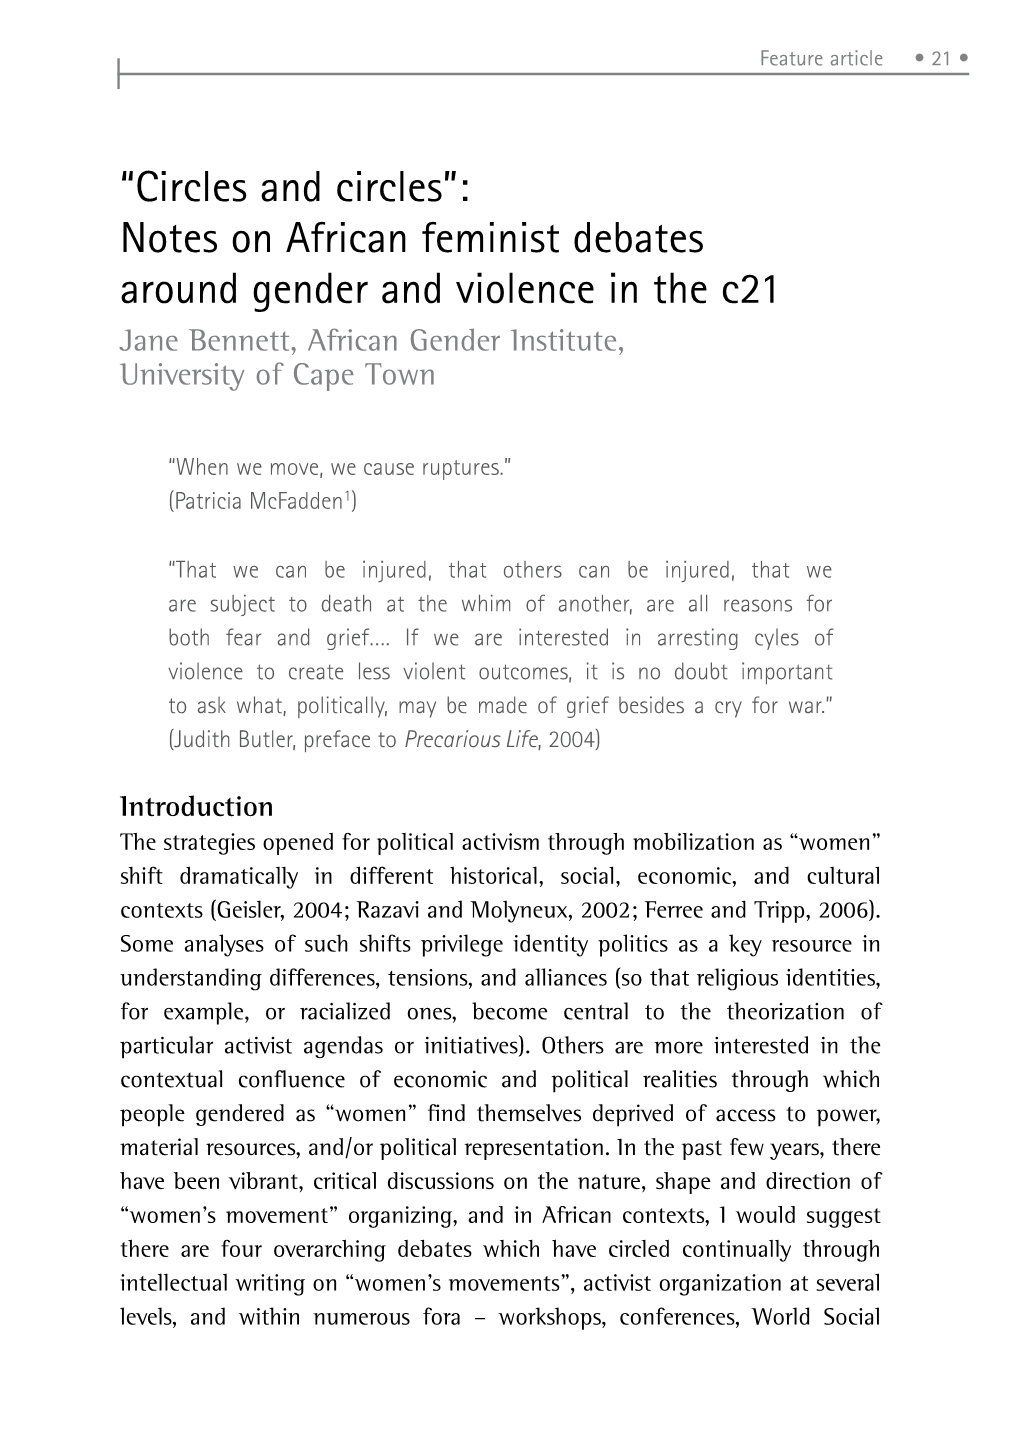 Notes on African Feminist Debates Around Gender and Violence in the C21 Jane Bennett, African Gender Institute, University of Cape Town